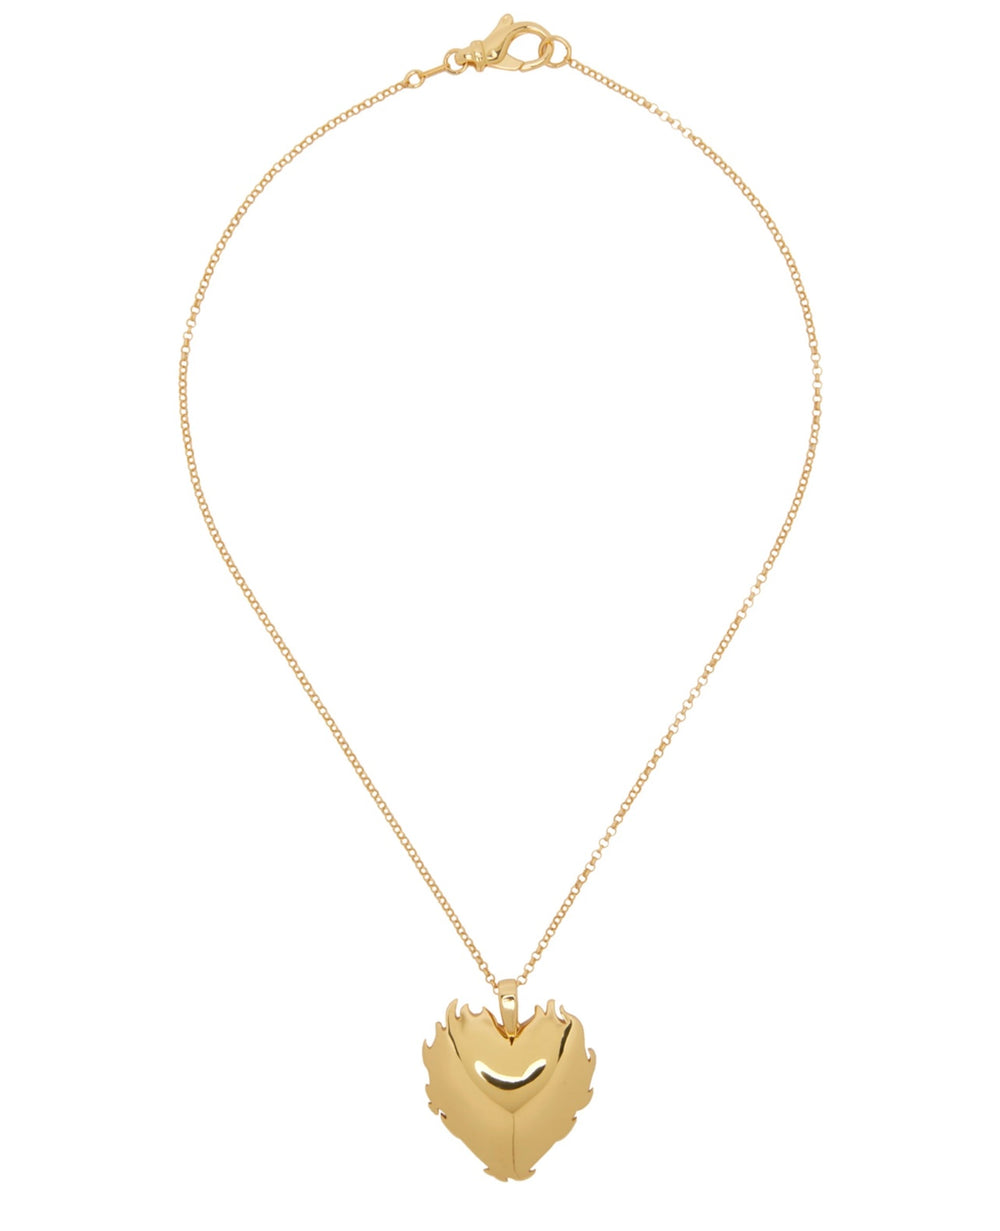 The Flame Heart Pendant Chain in Yellow Gold